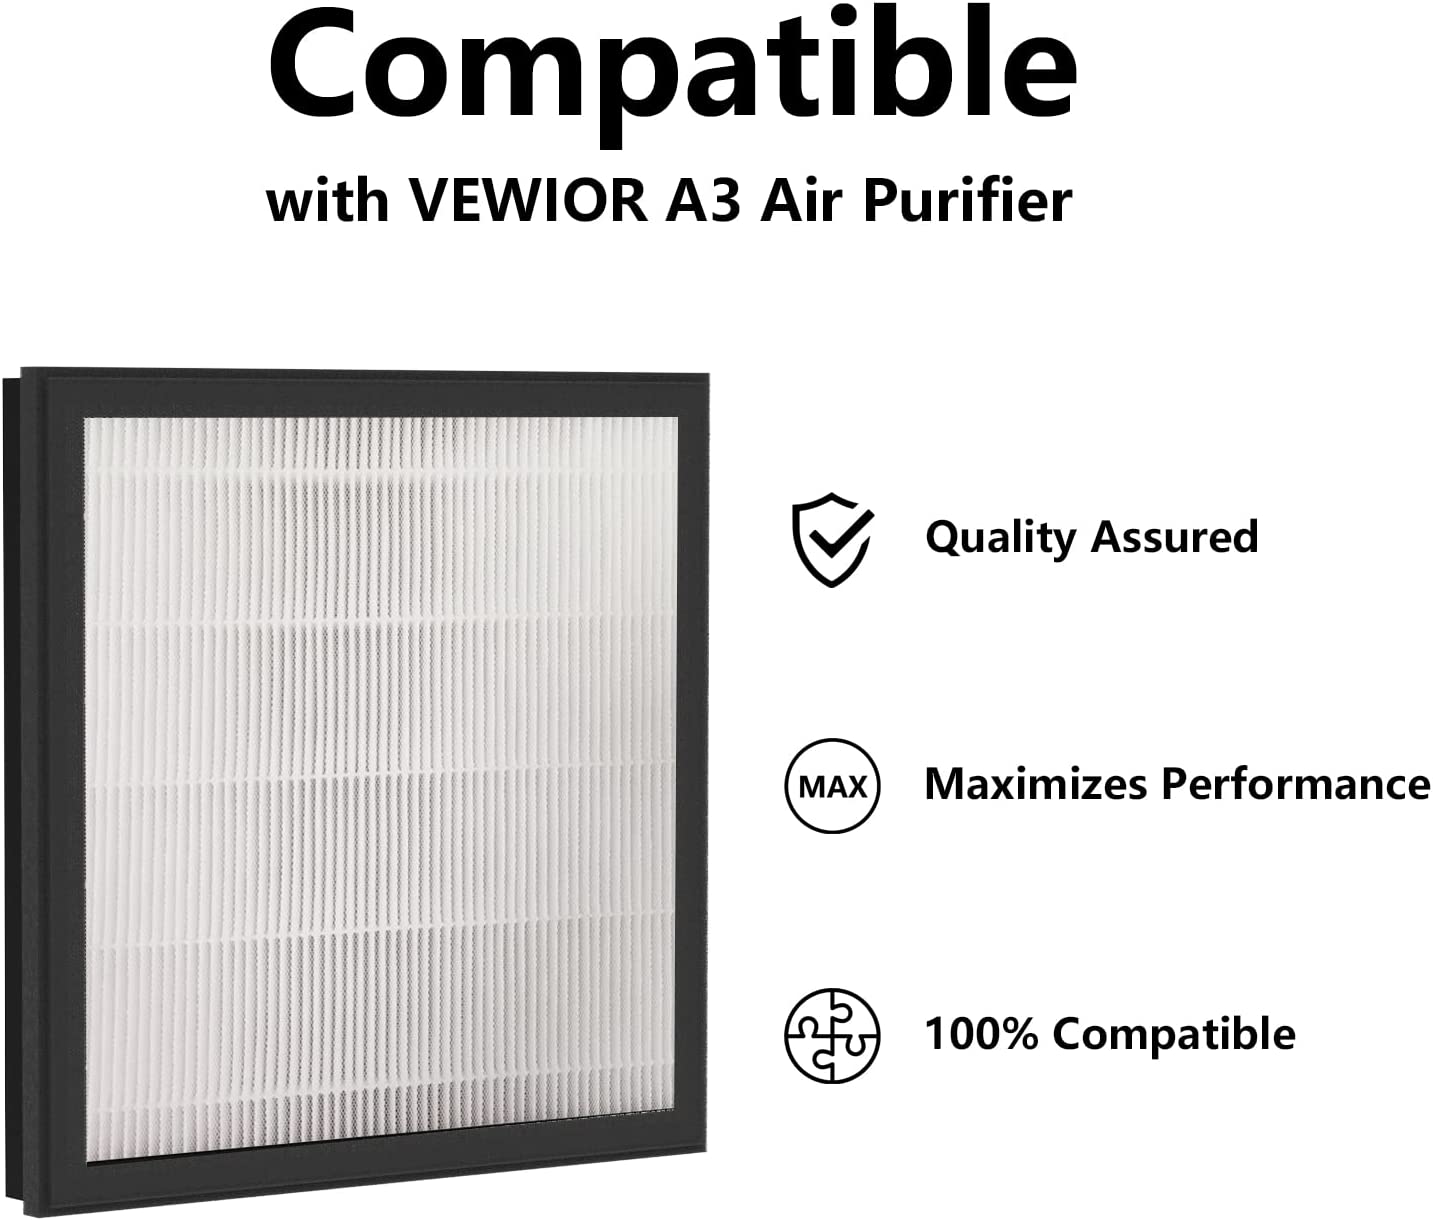 VEWIOR True HEPA Replacement Filter, Compatible A3 Air Purifier, H13 True HEPA Filter for A3 Air Cleaner Vewior